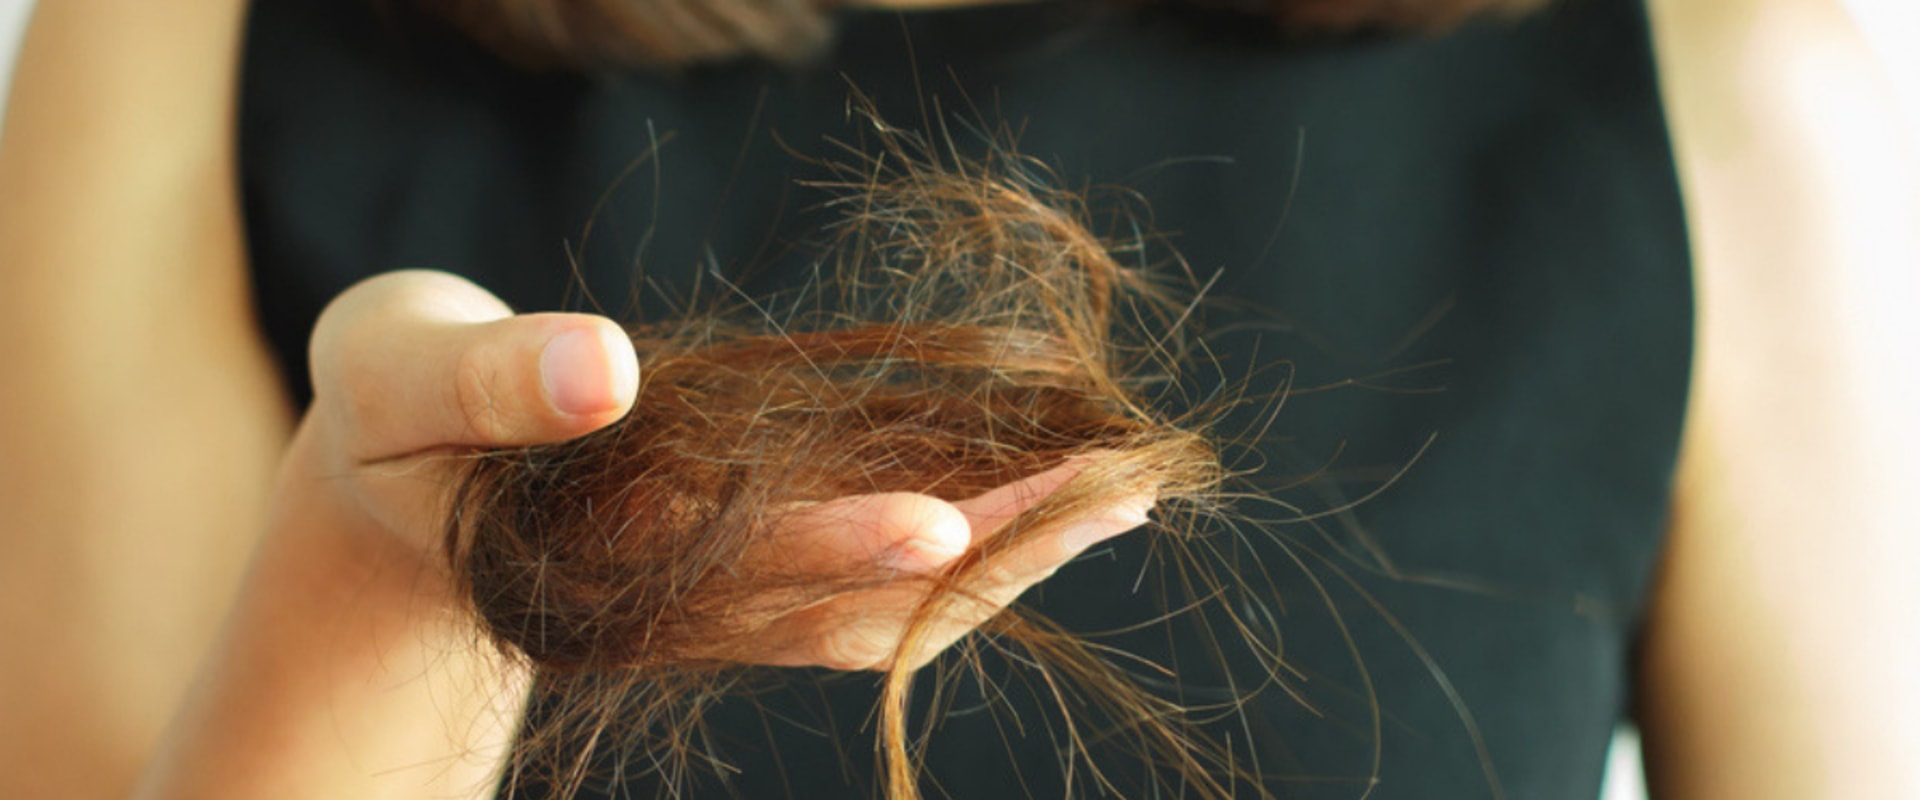 How long does hair loss last after losing weight?